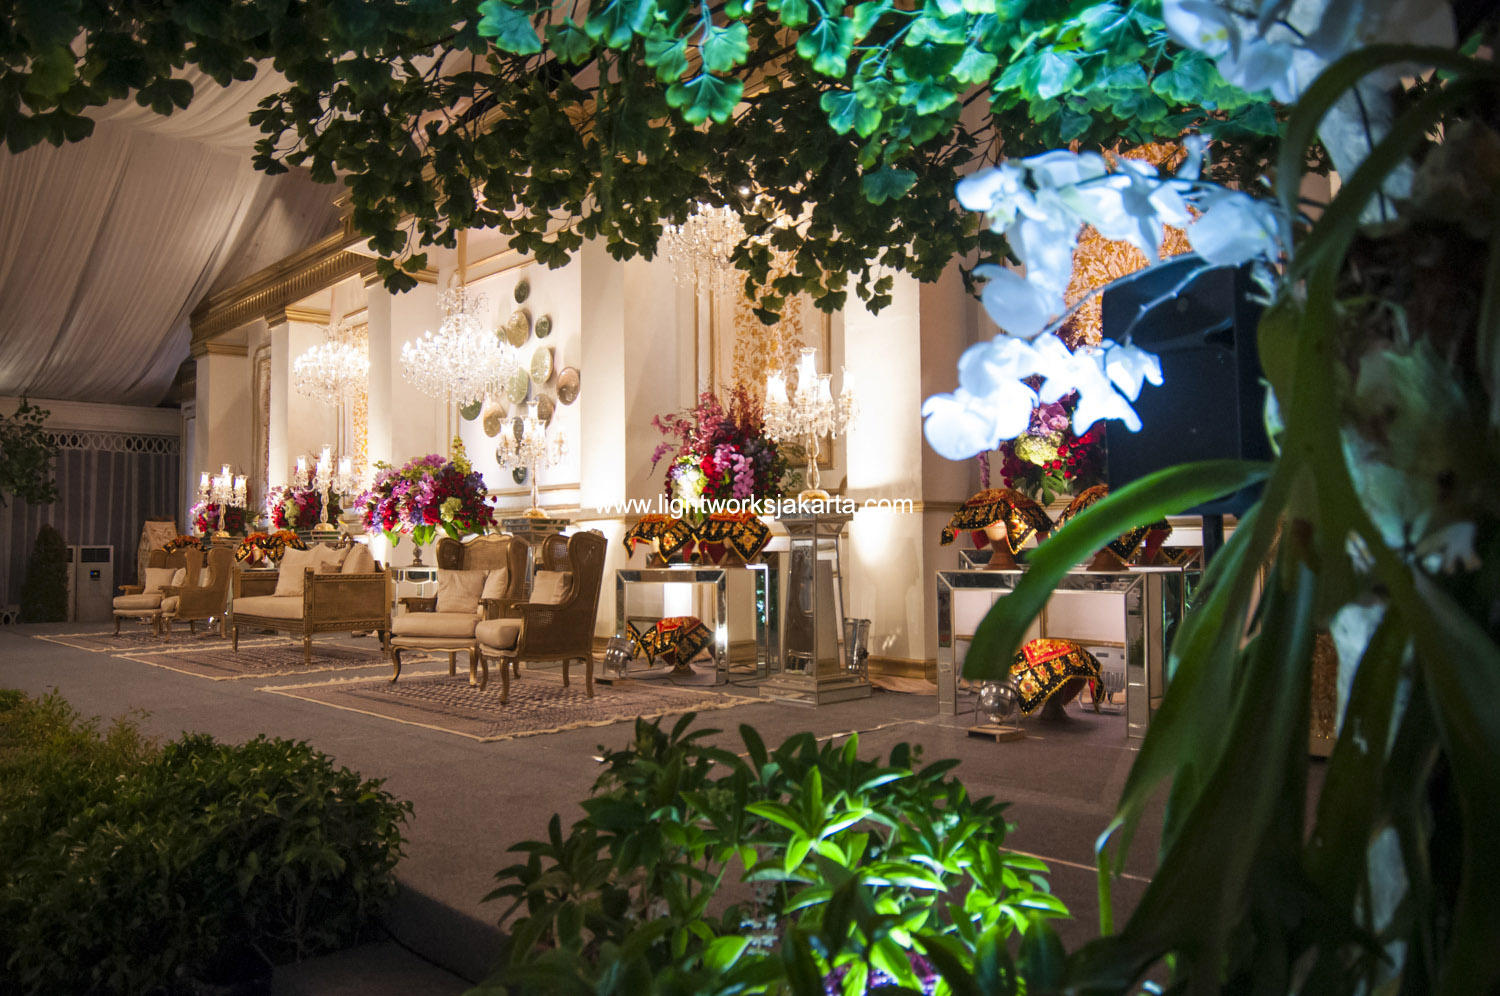 Muli and Ingga's Wedding; Decorated by Amaryllis; Located in Dharmawangsa Hotel; Lighting by Lightworks